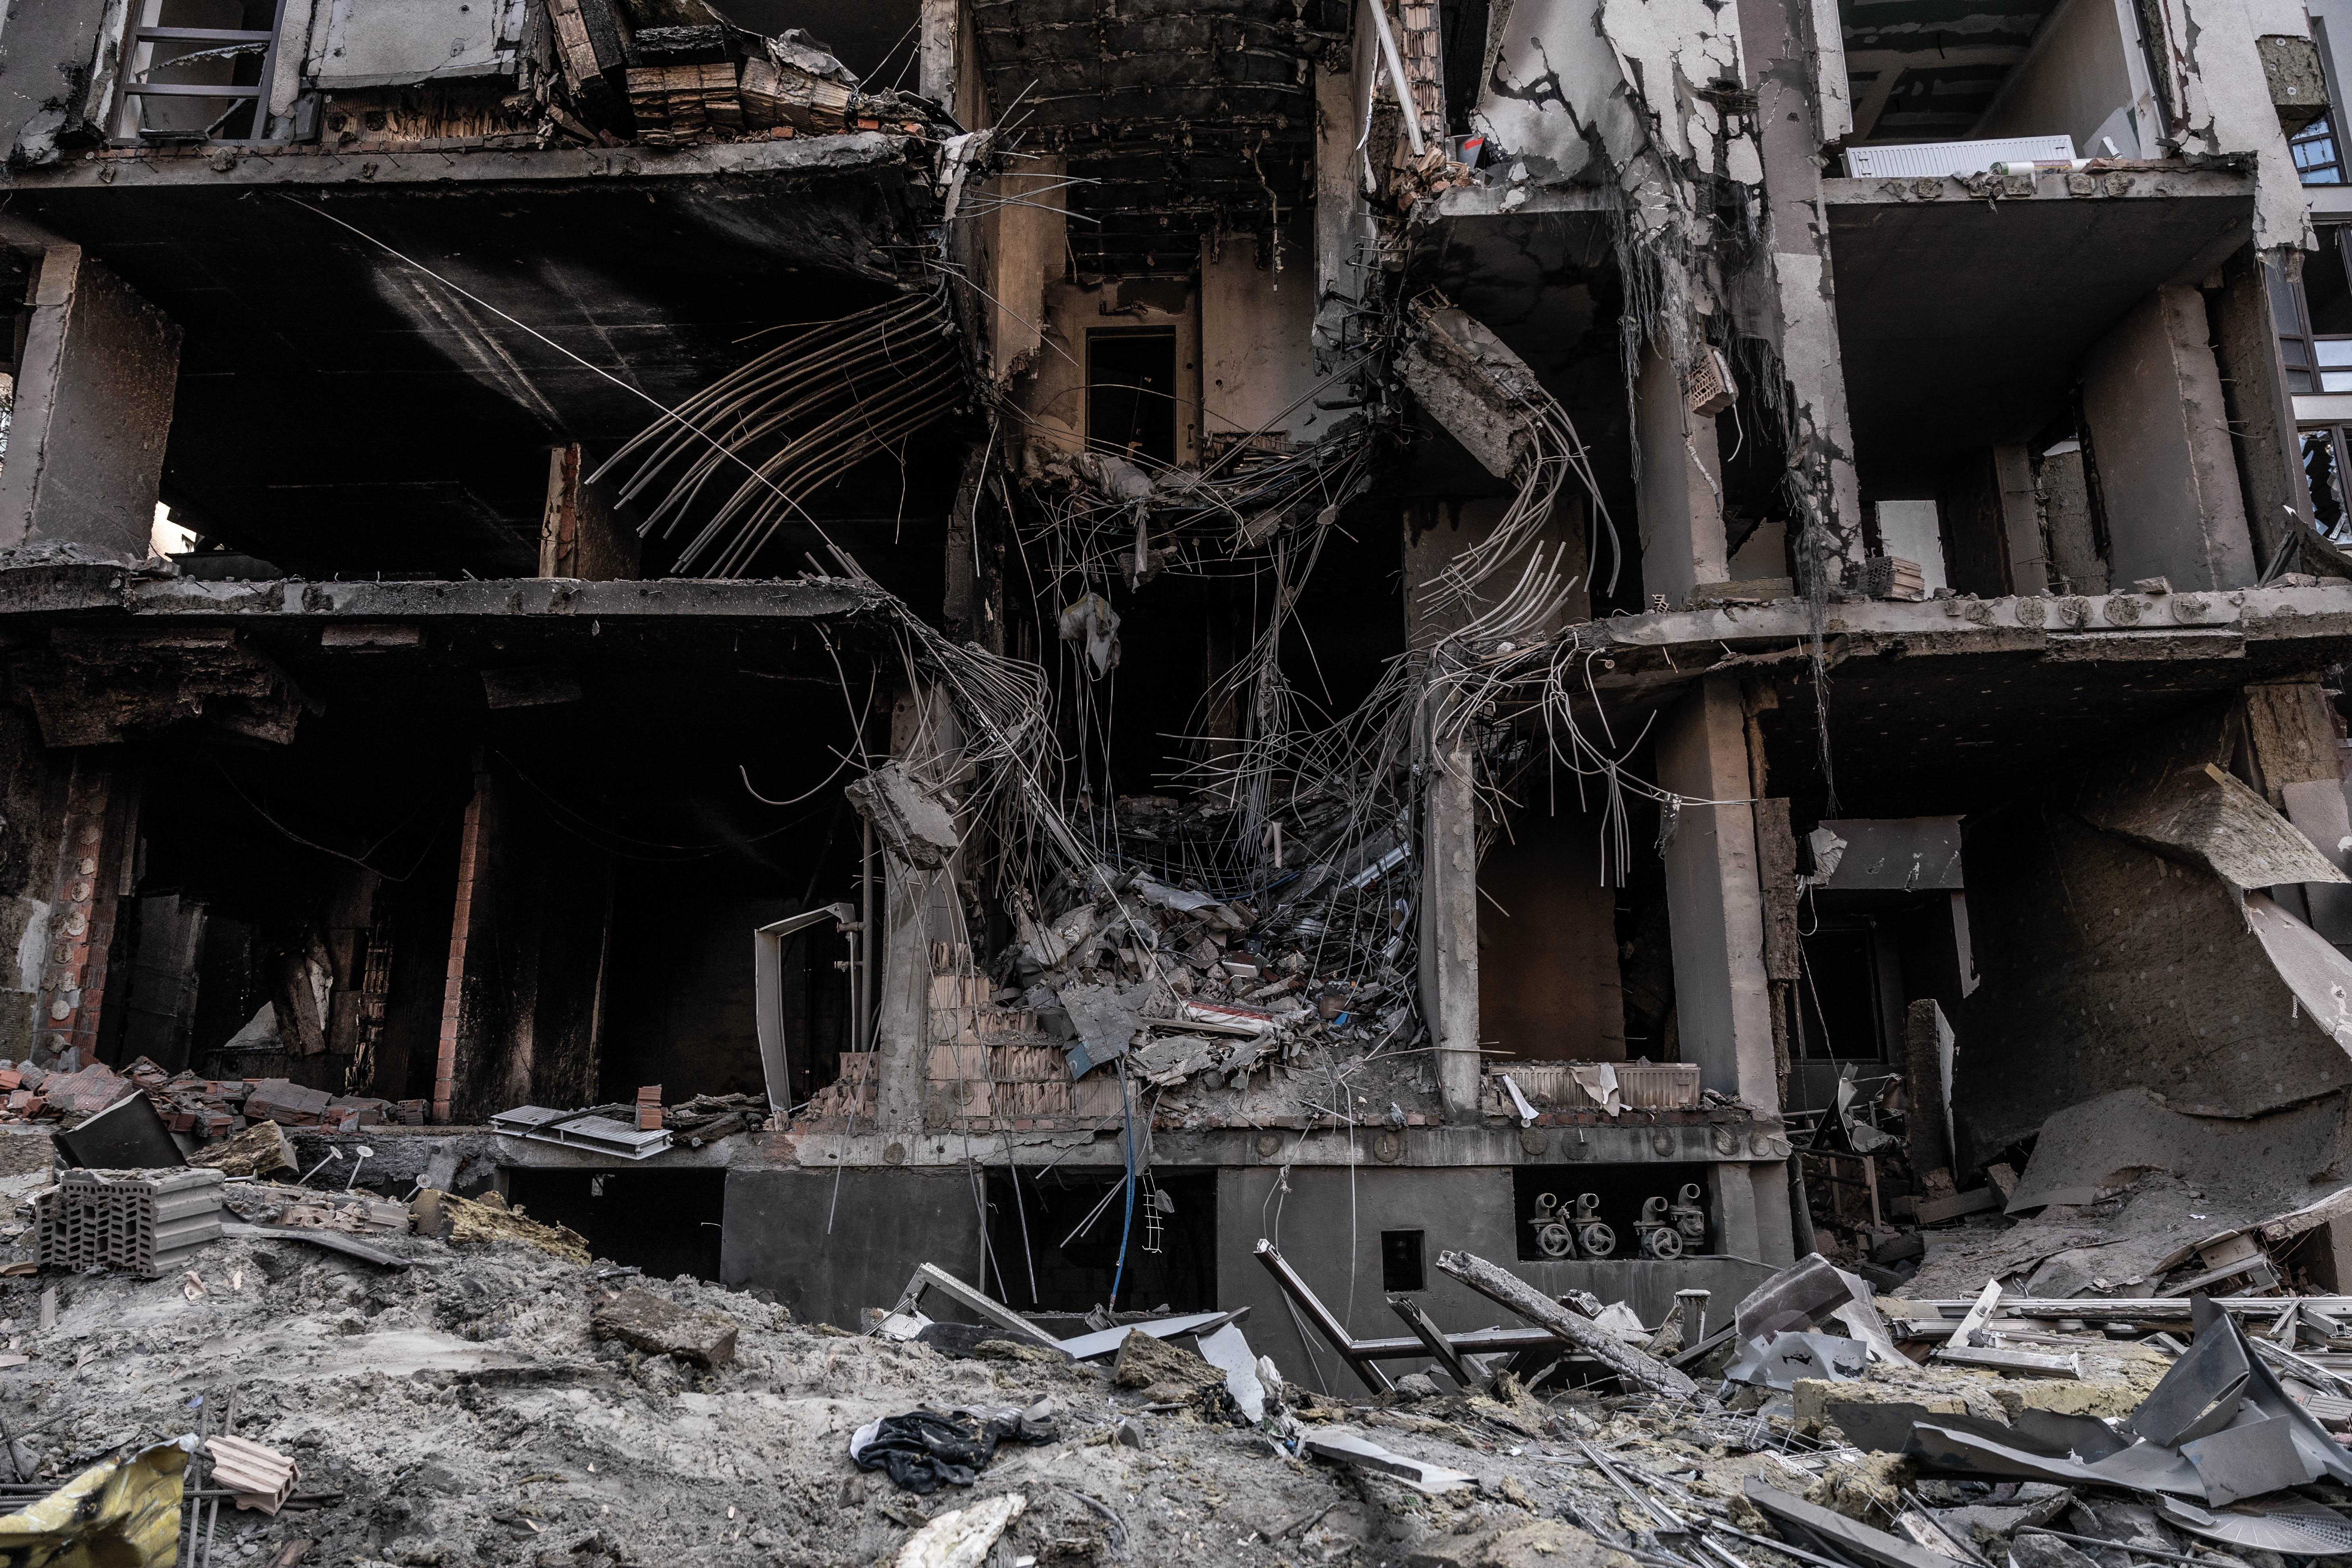 A civilian building in kyiv destroyed by a Russian missile.  (Photo: Franco Fafasuli)